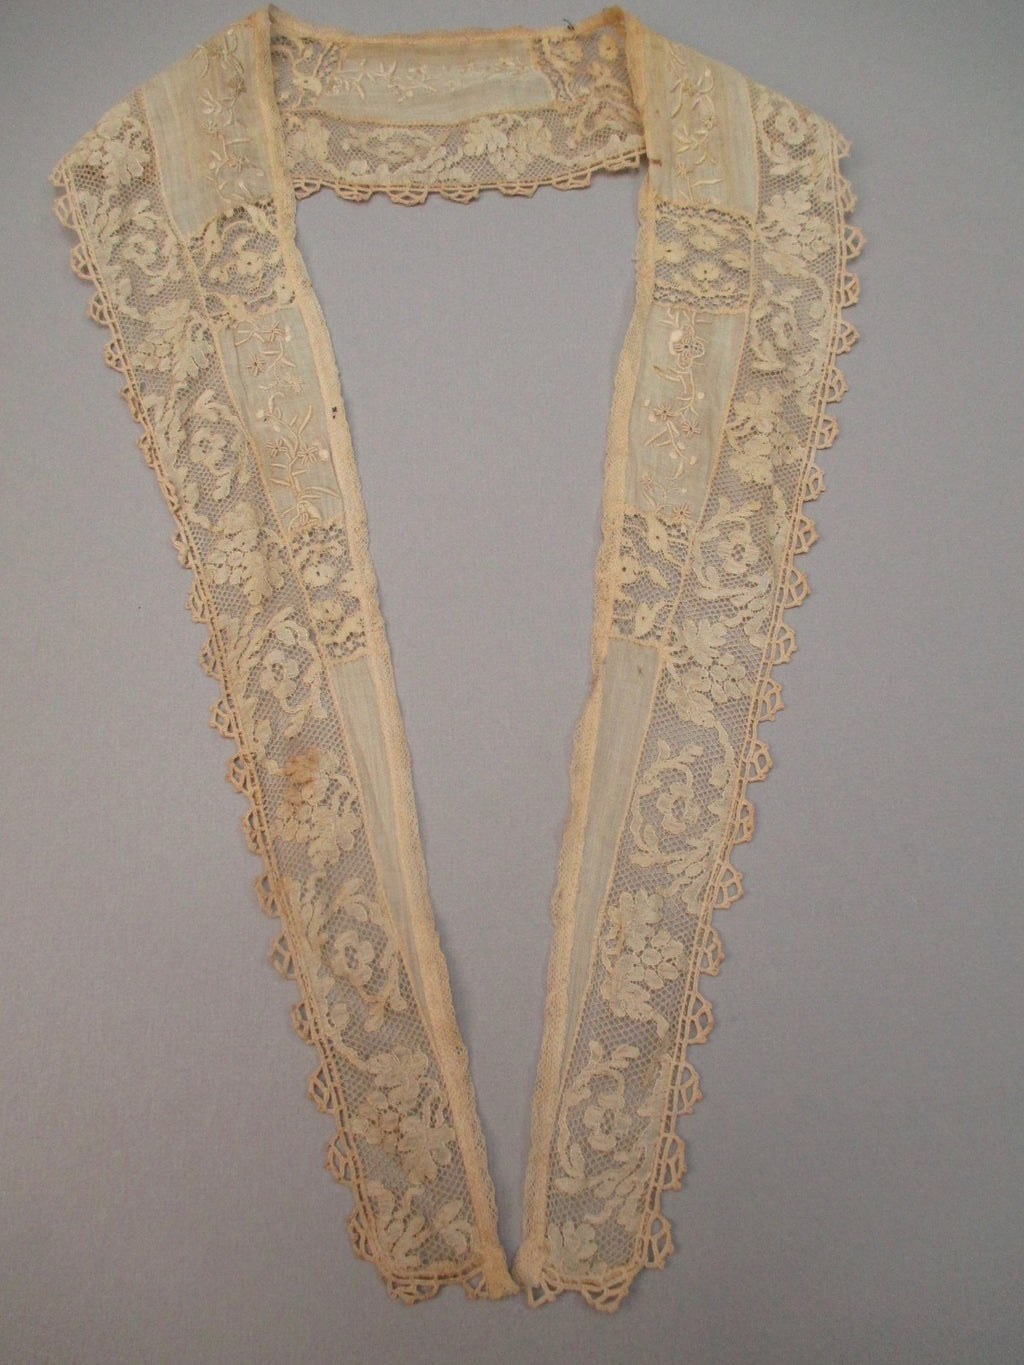 Antique Lace Shawl Collar Hand Embroidered